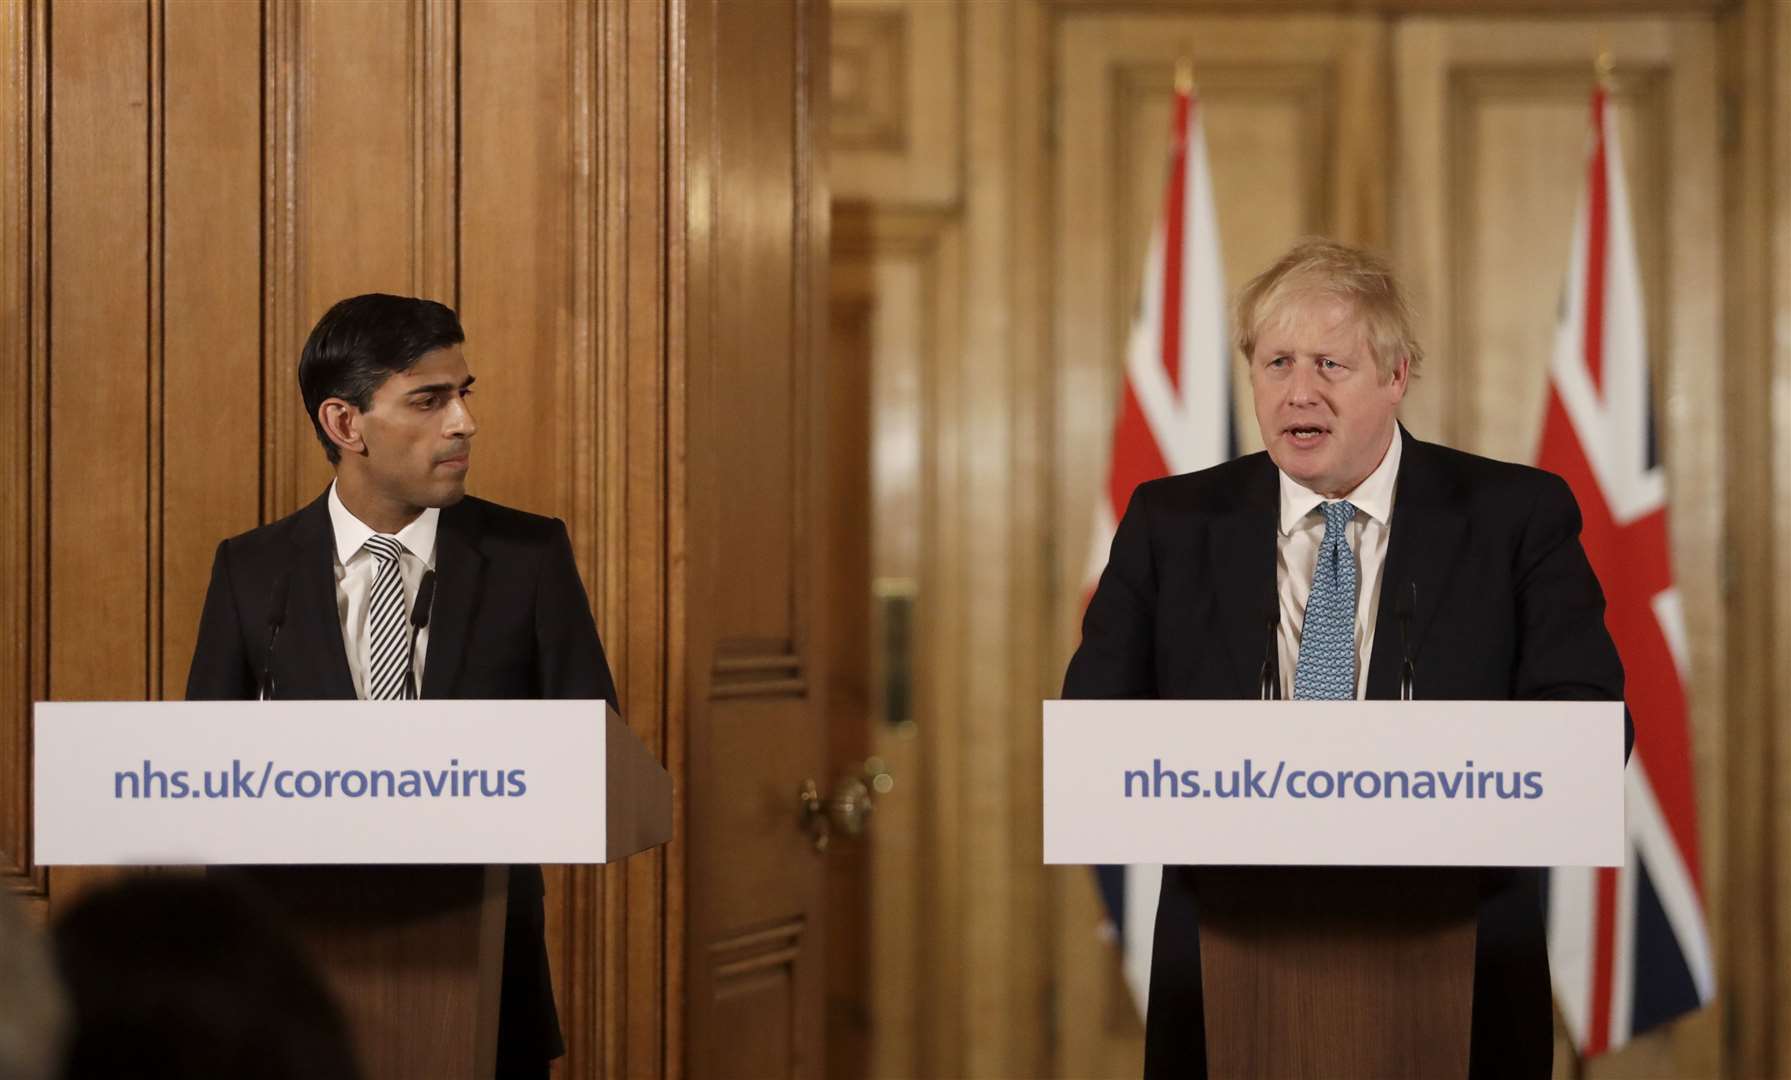 The Chancellor Rishi Sunak and PM Boris Johnson have unveiled a host of measures designed to help businesses during this challenging period